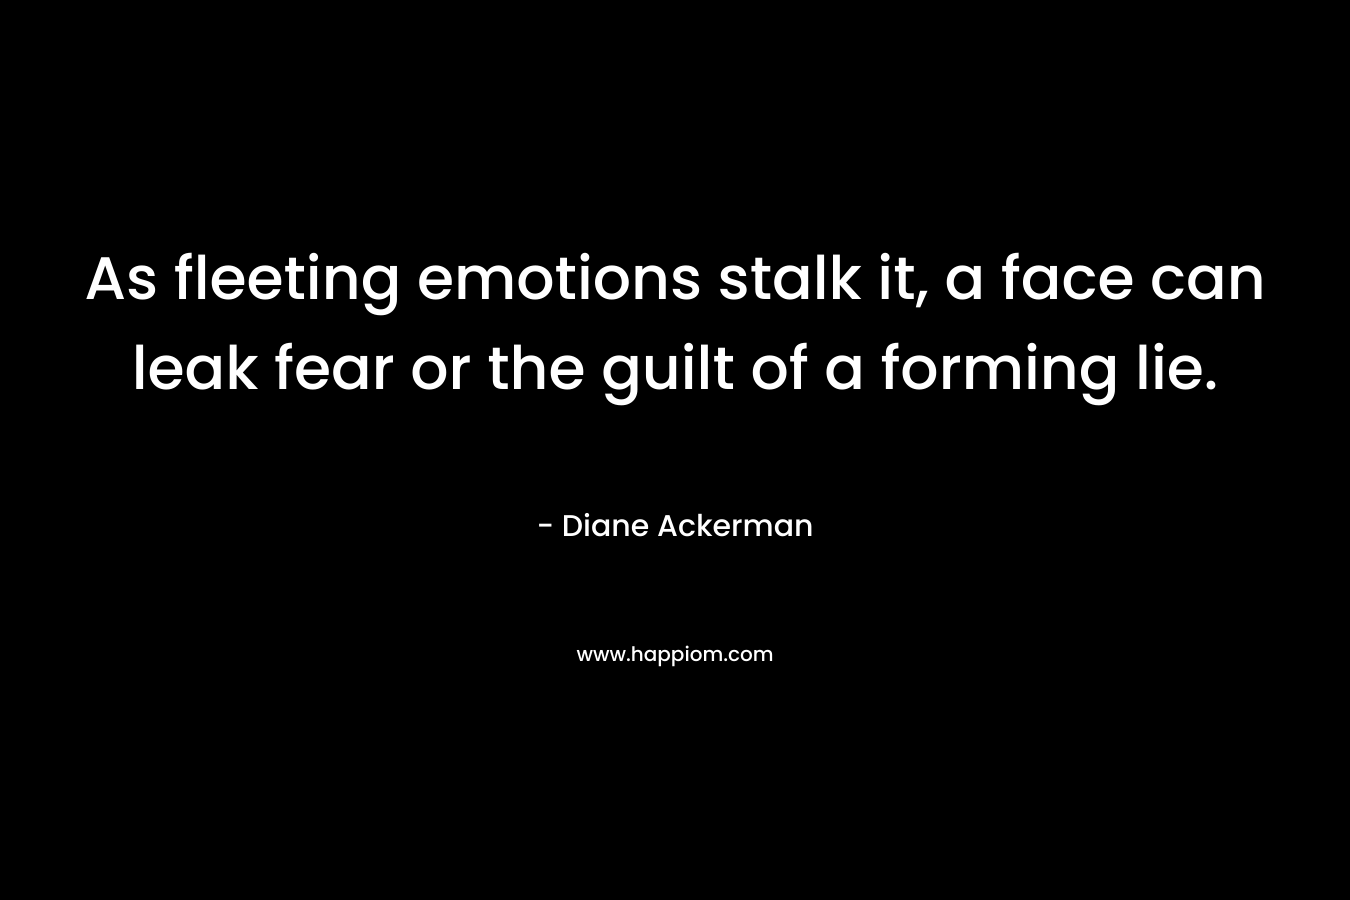 As fleeting emotions stalk it, a face can leak fear or the guilt of a forming lie. – Diane Ackerman